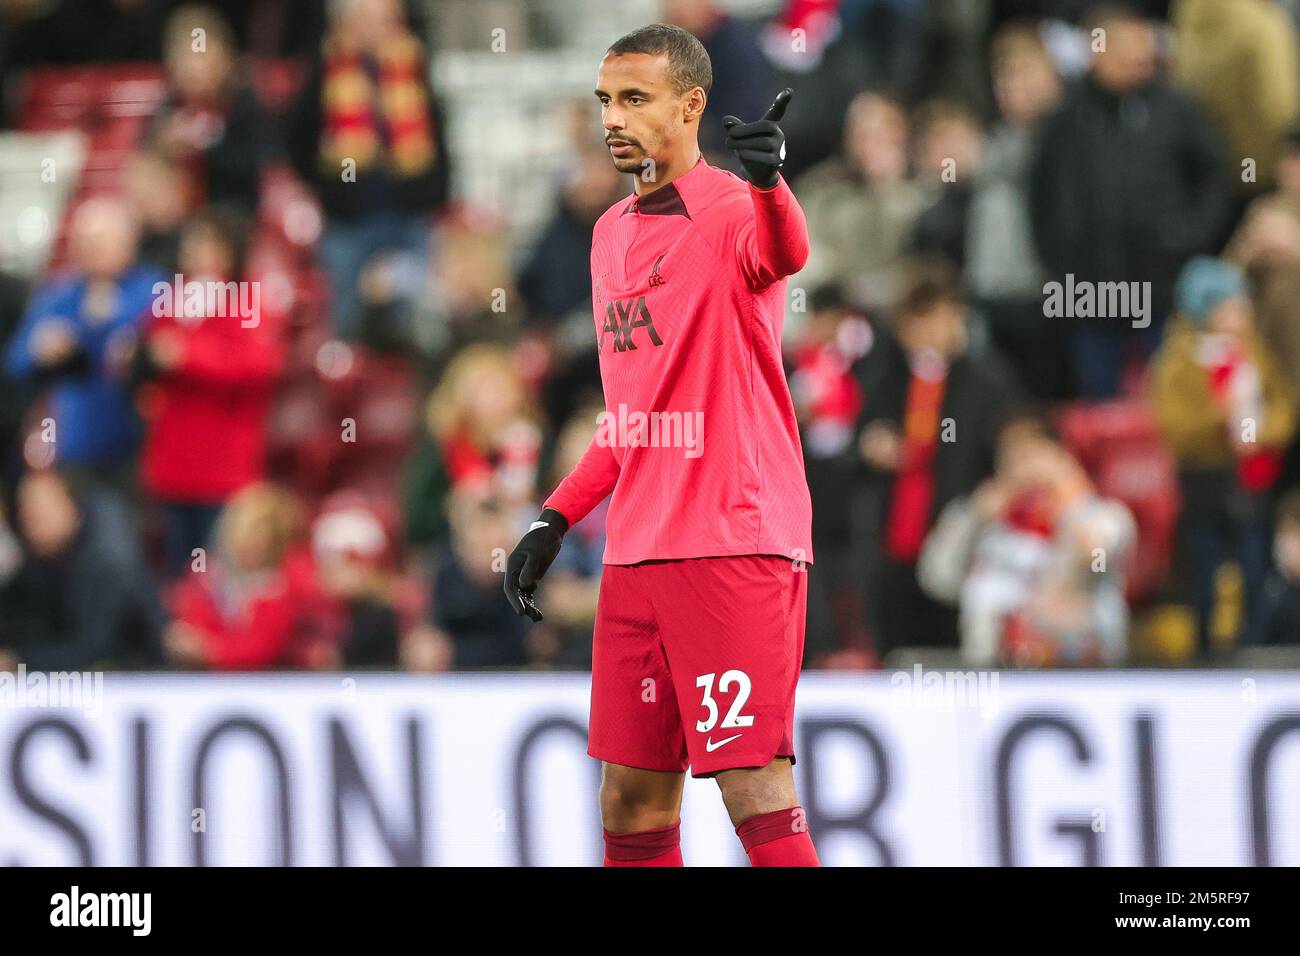 Liverpool, UK. 30th Dec, 2022. Joel Matip #32 of Liverpool during the pre-game warmup ahead of the Premier League match Liverpool vs Leicester City at Anfield, Liverpool, United Kingdom, 30th December 2022 (Photo by Mark Cosgrove/News Images) in, on 12/30/2022. (Photo by Mark Cosgrove/News Images/Sipa USA) Credit: Sipa USA/Alamy Live News Credit: Sipa USA/Alamy Live News Stock Photo